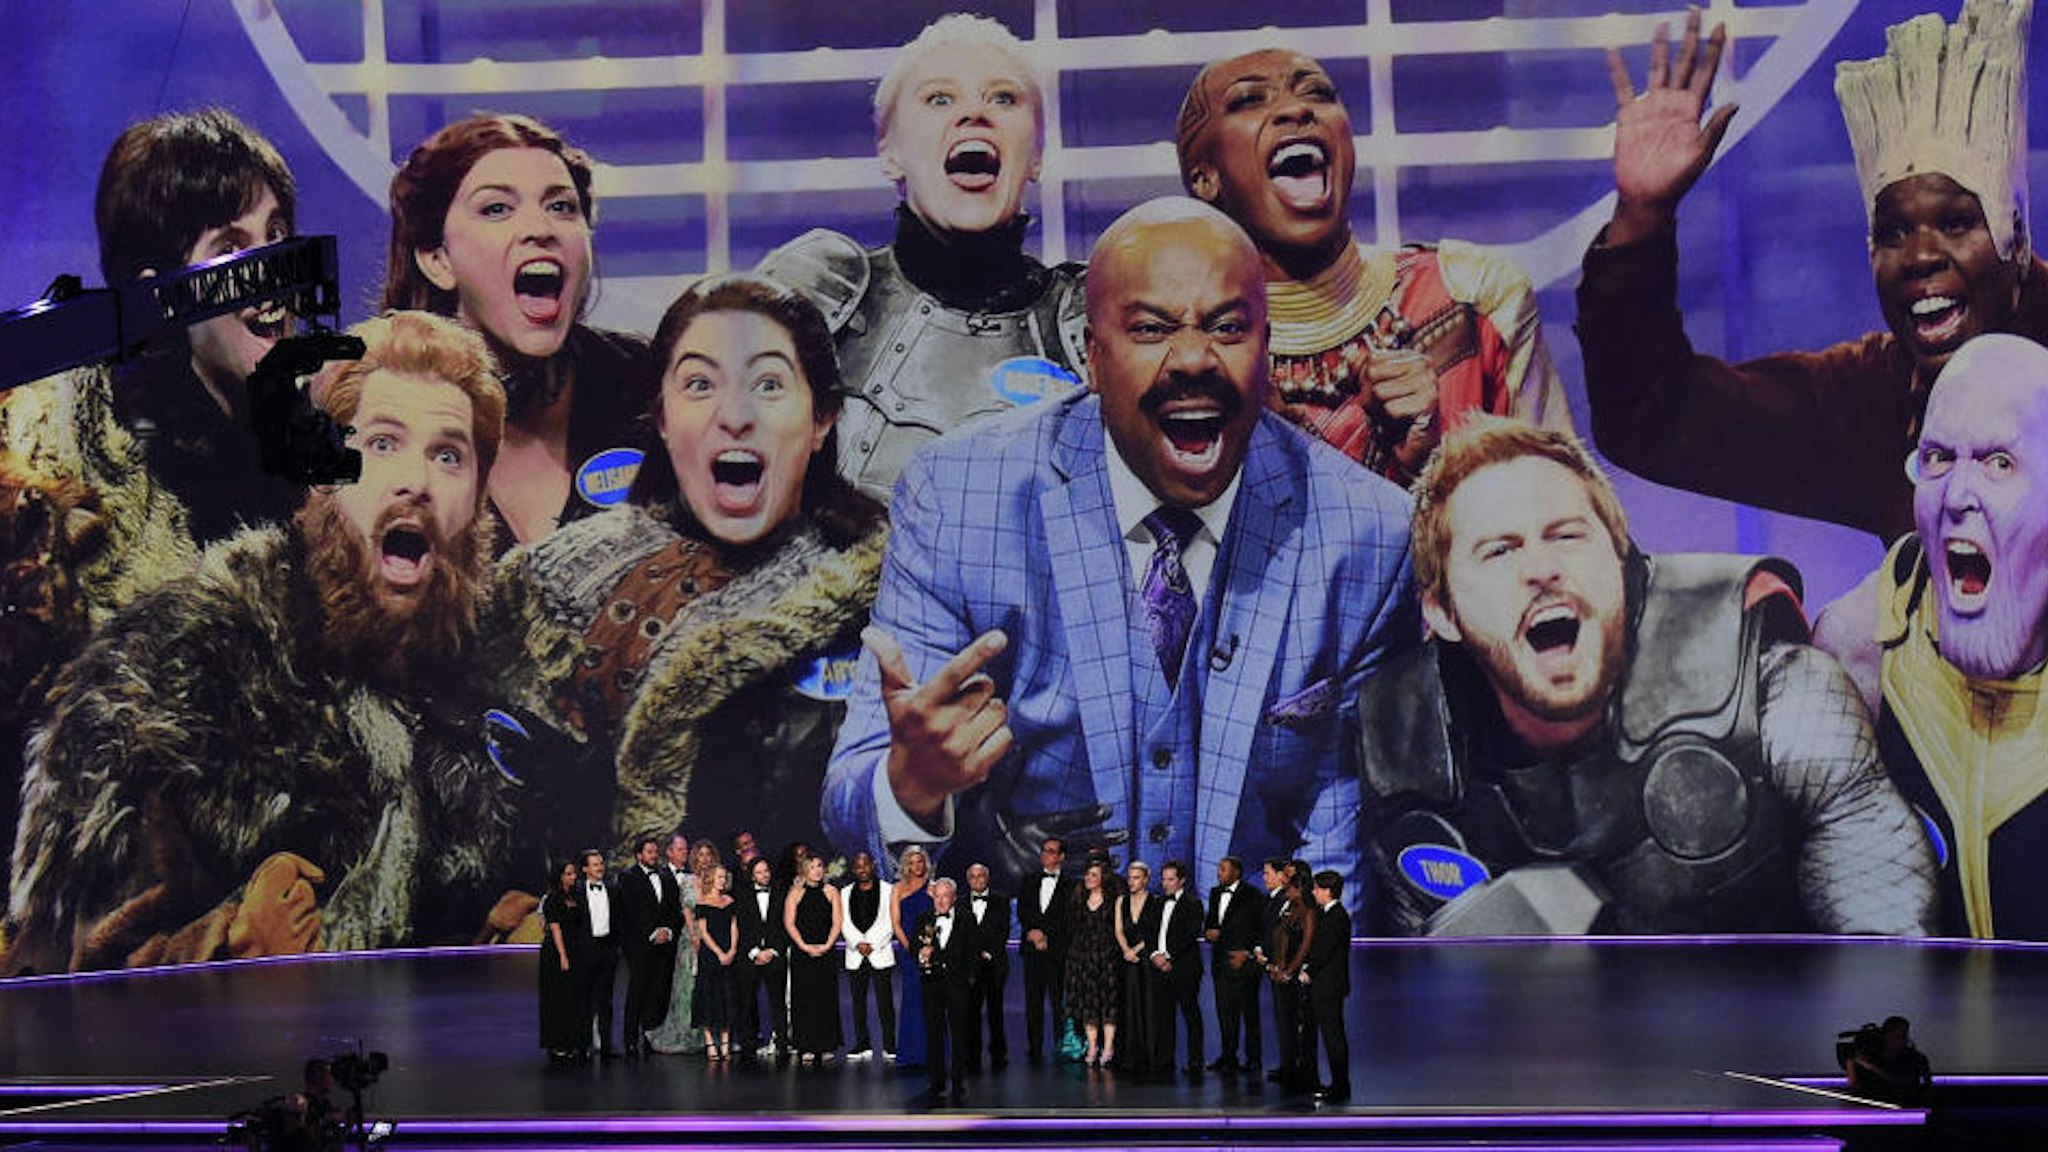 Lorne Michaels and cast and crew of 'Saturday Night Live' accept the Outstanding Variety Sketch Series award for 'Saturday Night Live' onstage during the 71st Emmy Awards at Microsoft Theater on September 22, 2019 in Los Angeles, California. (Photo by Kevin Winter/Getty Images)